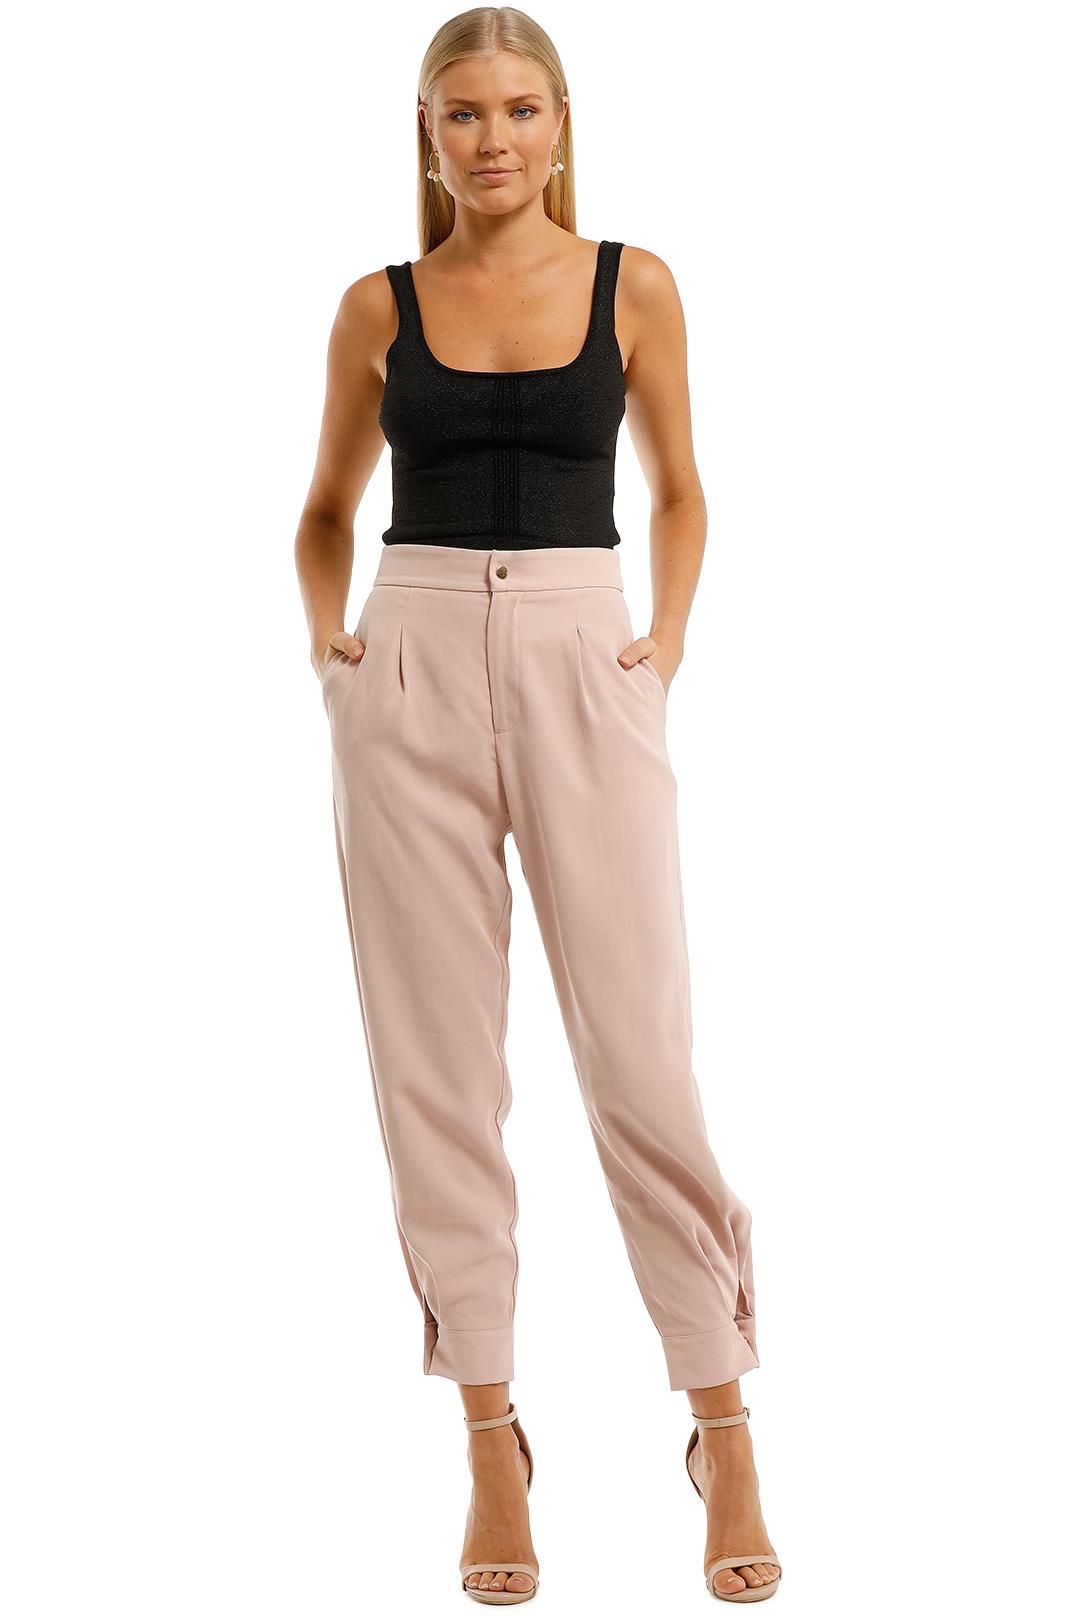 Pasduchas Halo Pant Nude with Side Pockets